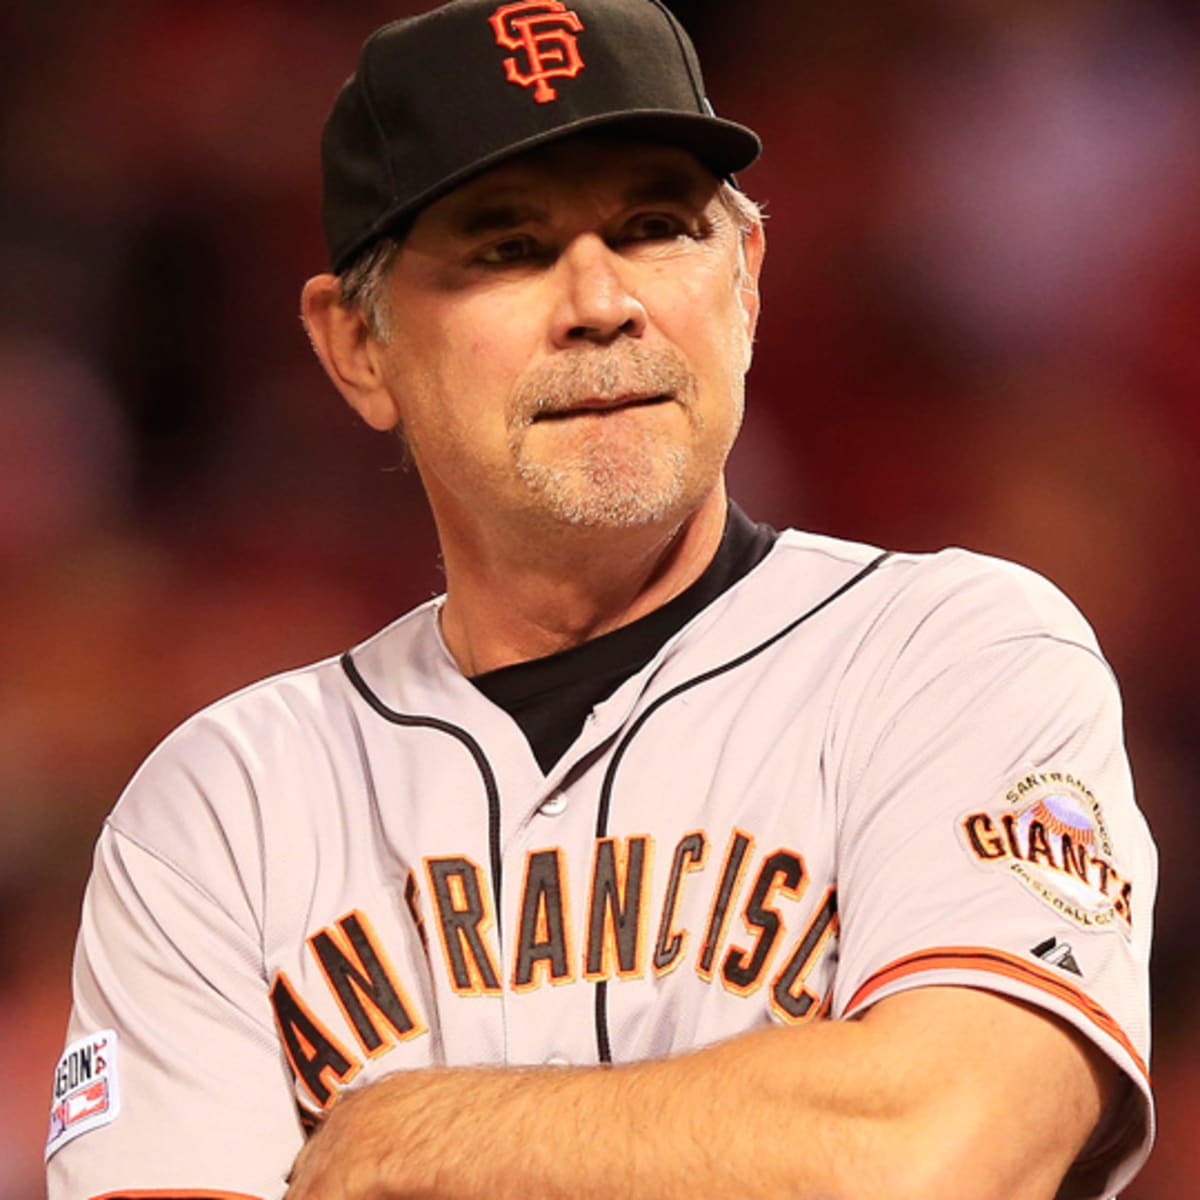 Breaking down Giants manager Bruce Bochy's Hall of Fame chances